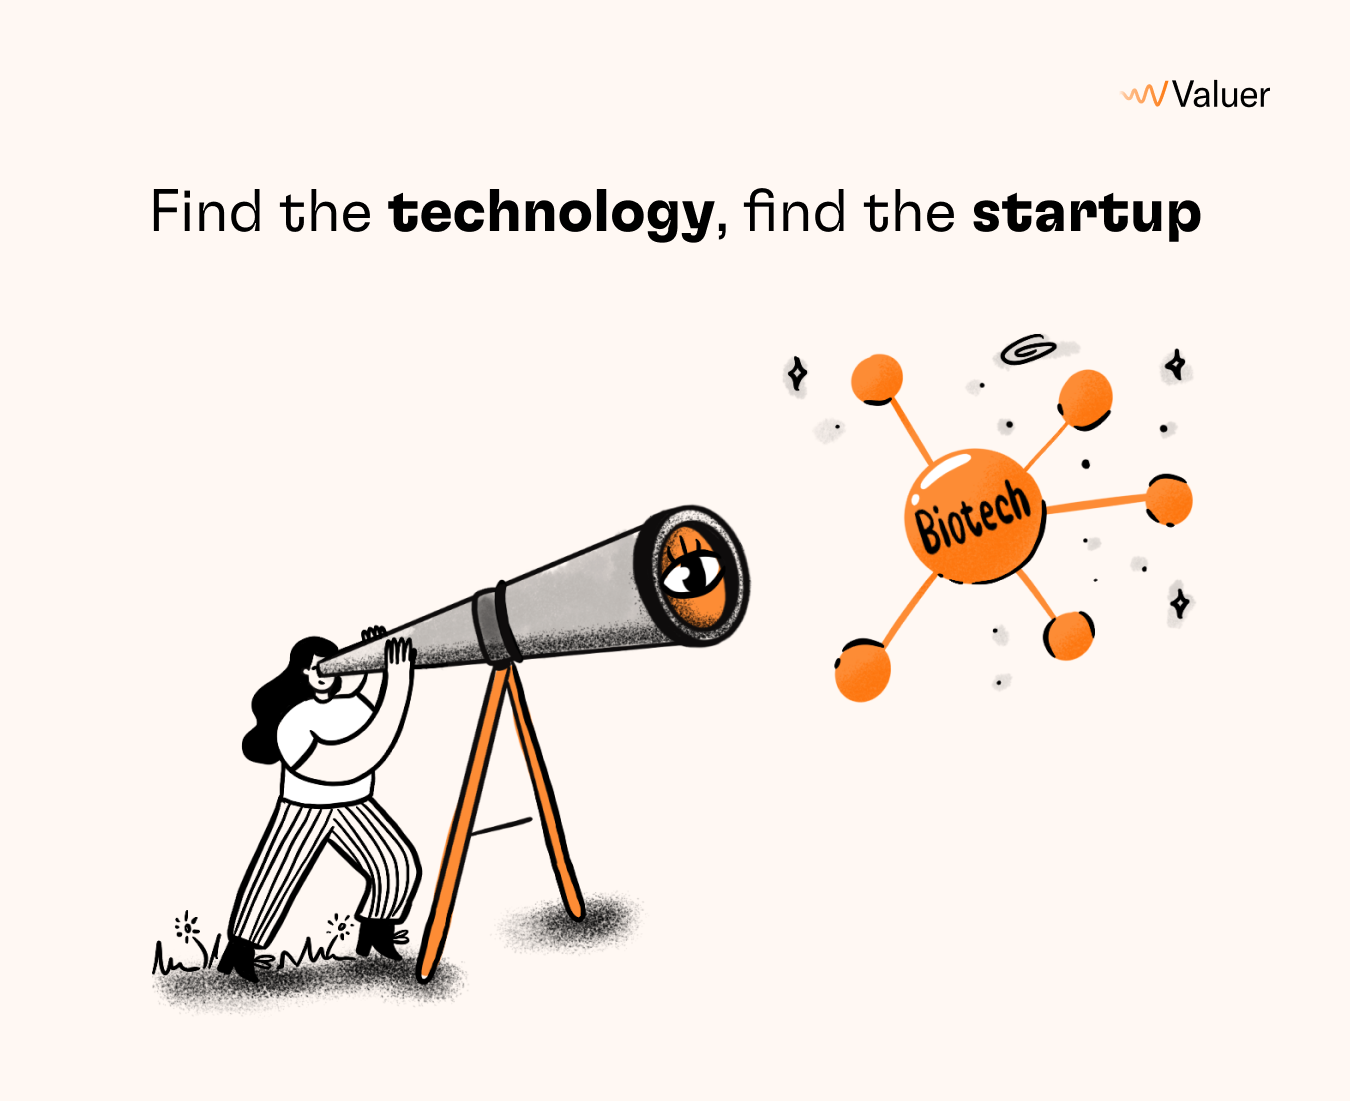 Find the technology, find the startup